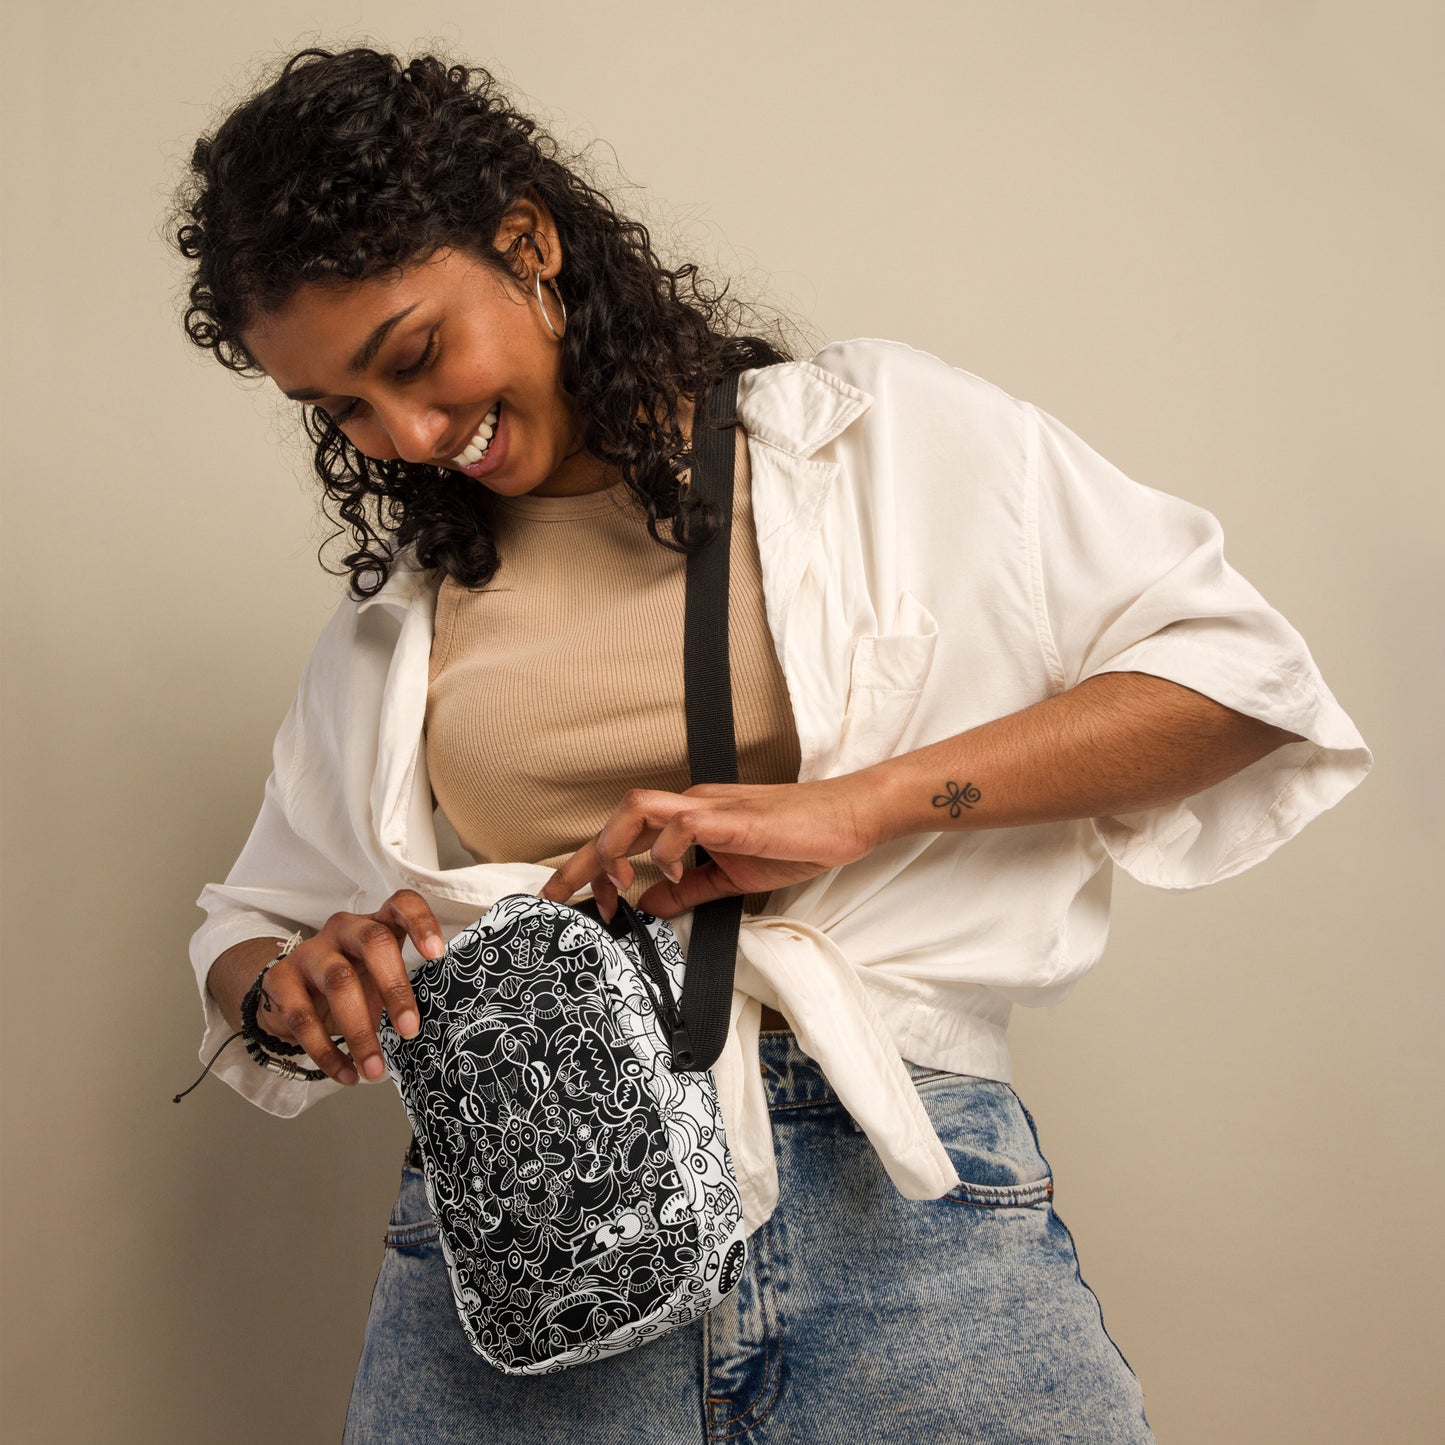 The powerful dark side of the Doodle world - Utility crossbody bag. Lifestyle